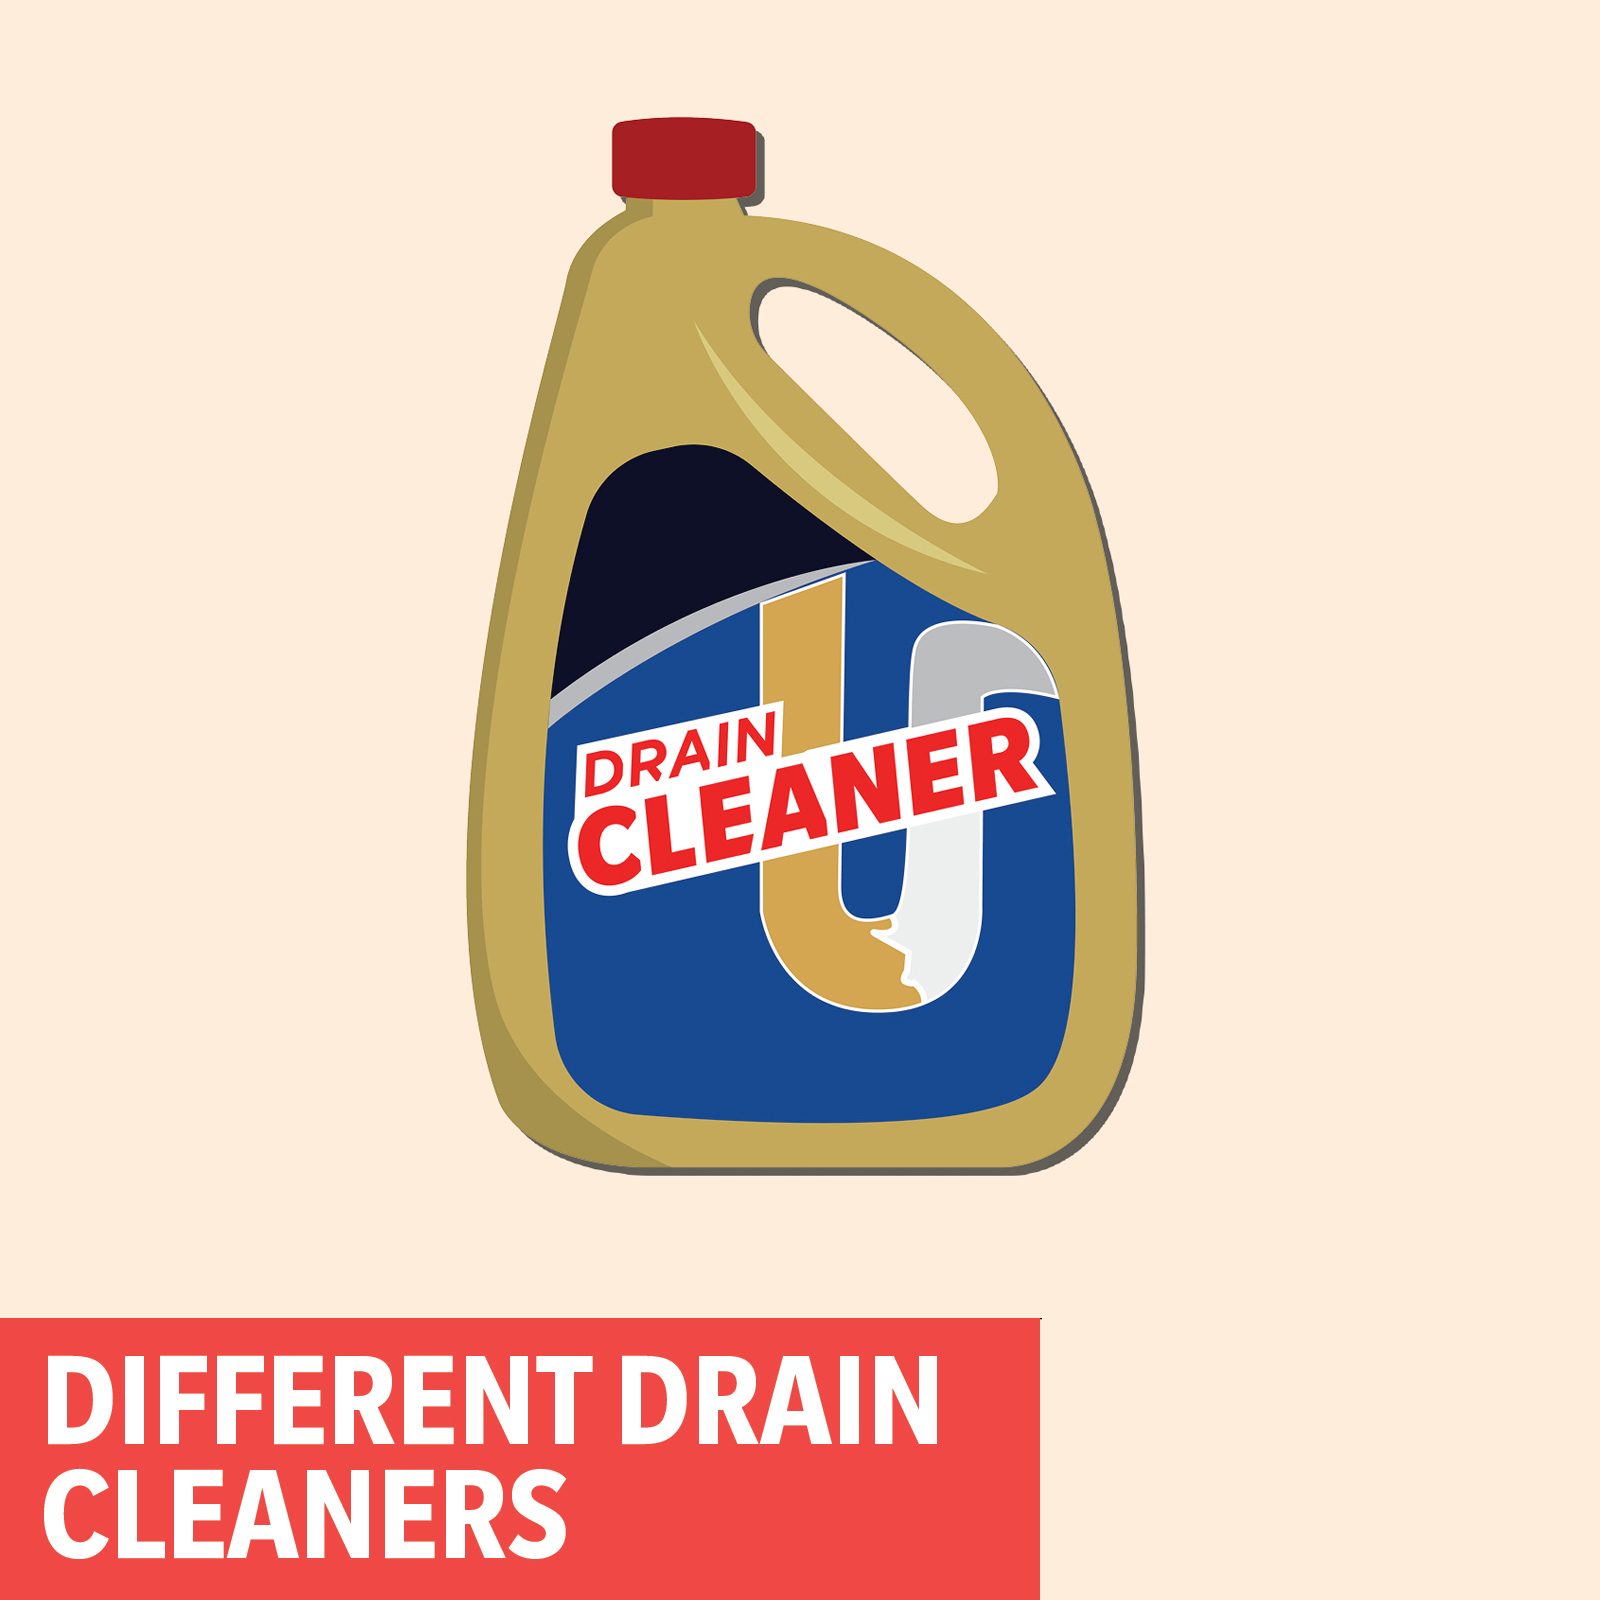 https://www.tasteofhome.com/wp-content/uploads/2018/12/Different-Drain-Cleaners-copy.jpg?fit=700%2C700